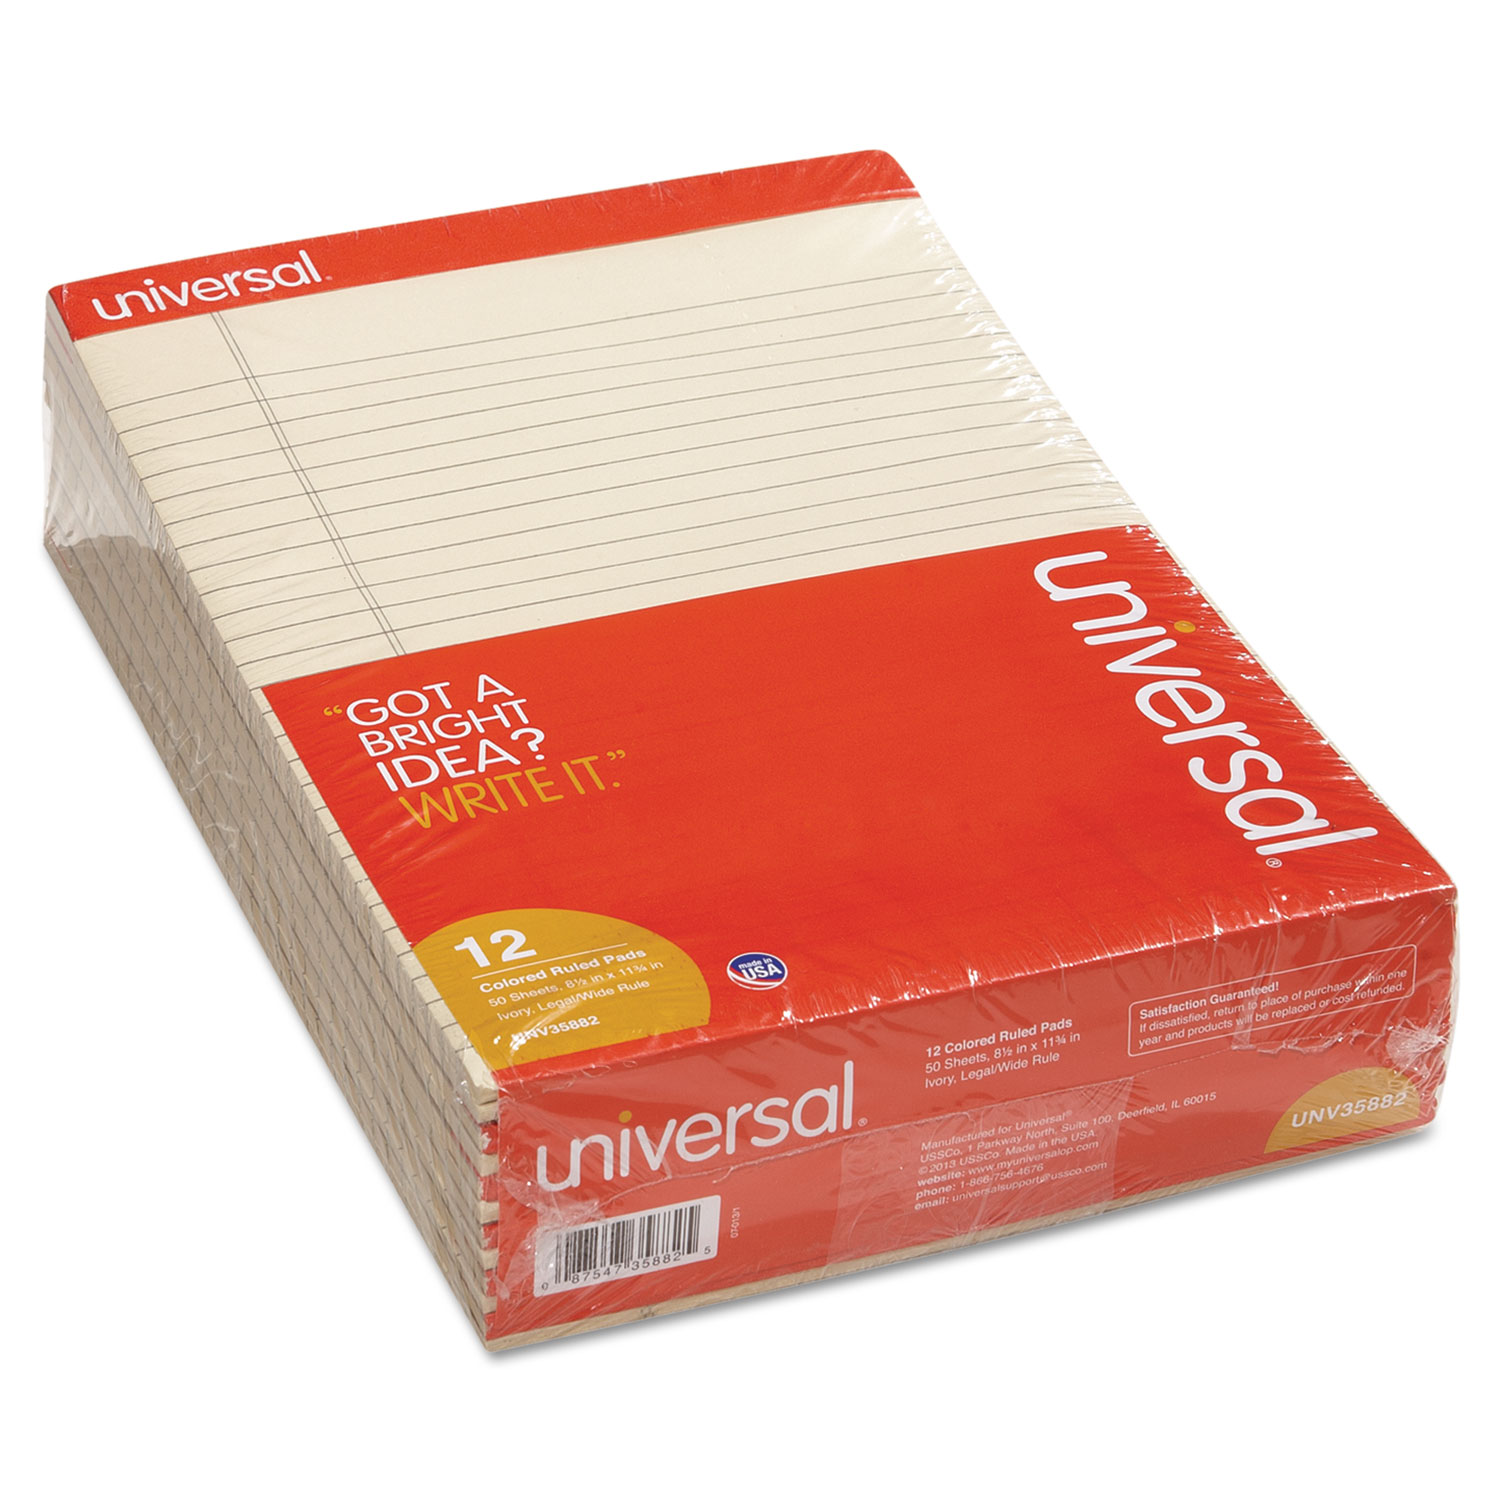  Universal UNV35882 Colored Perforated Writing Pads, Wide/Legal Rule, 8.5 x 11, Ivory, 50 Sheets, Dozen (UNV35882) 